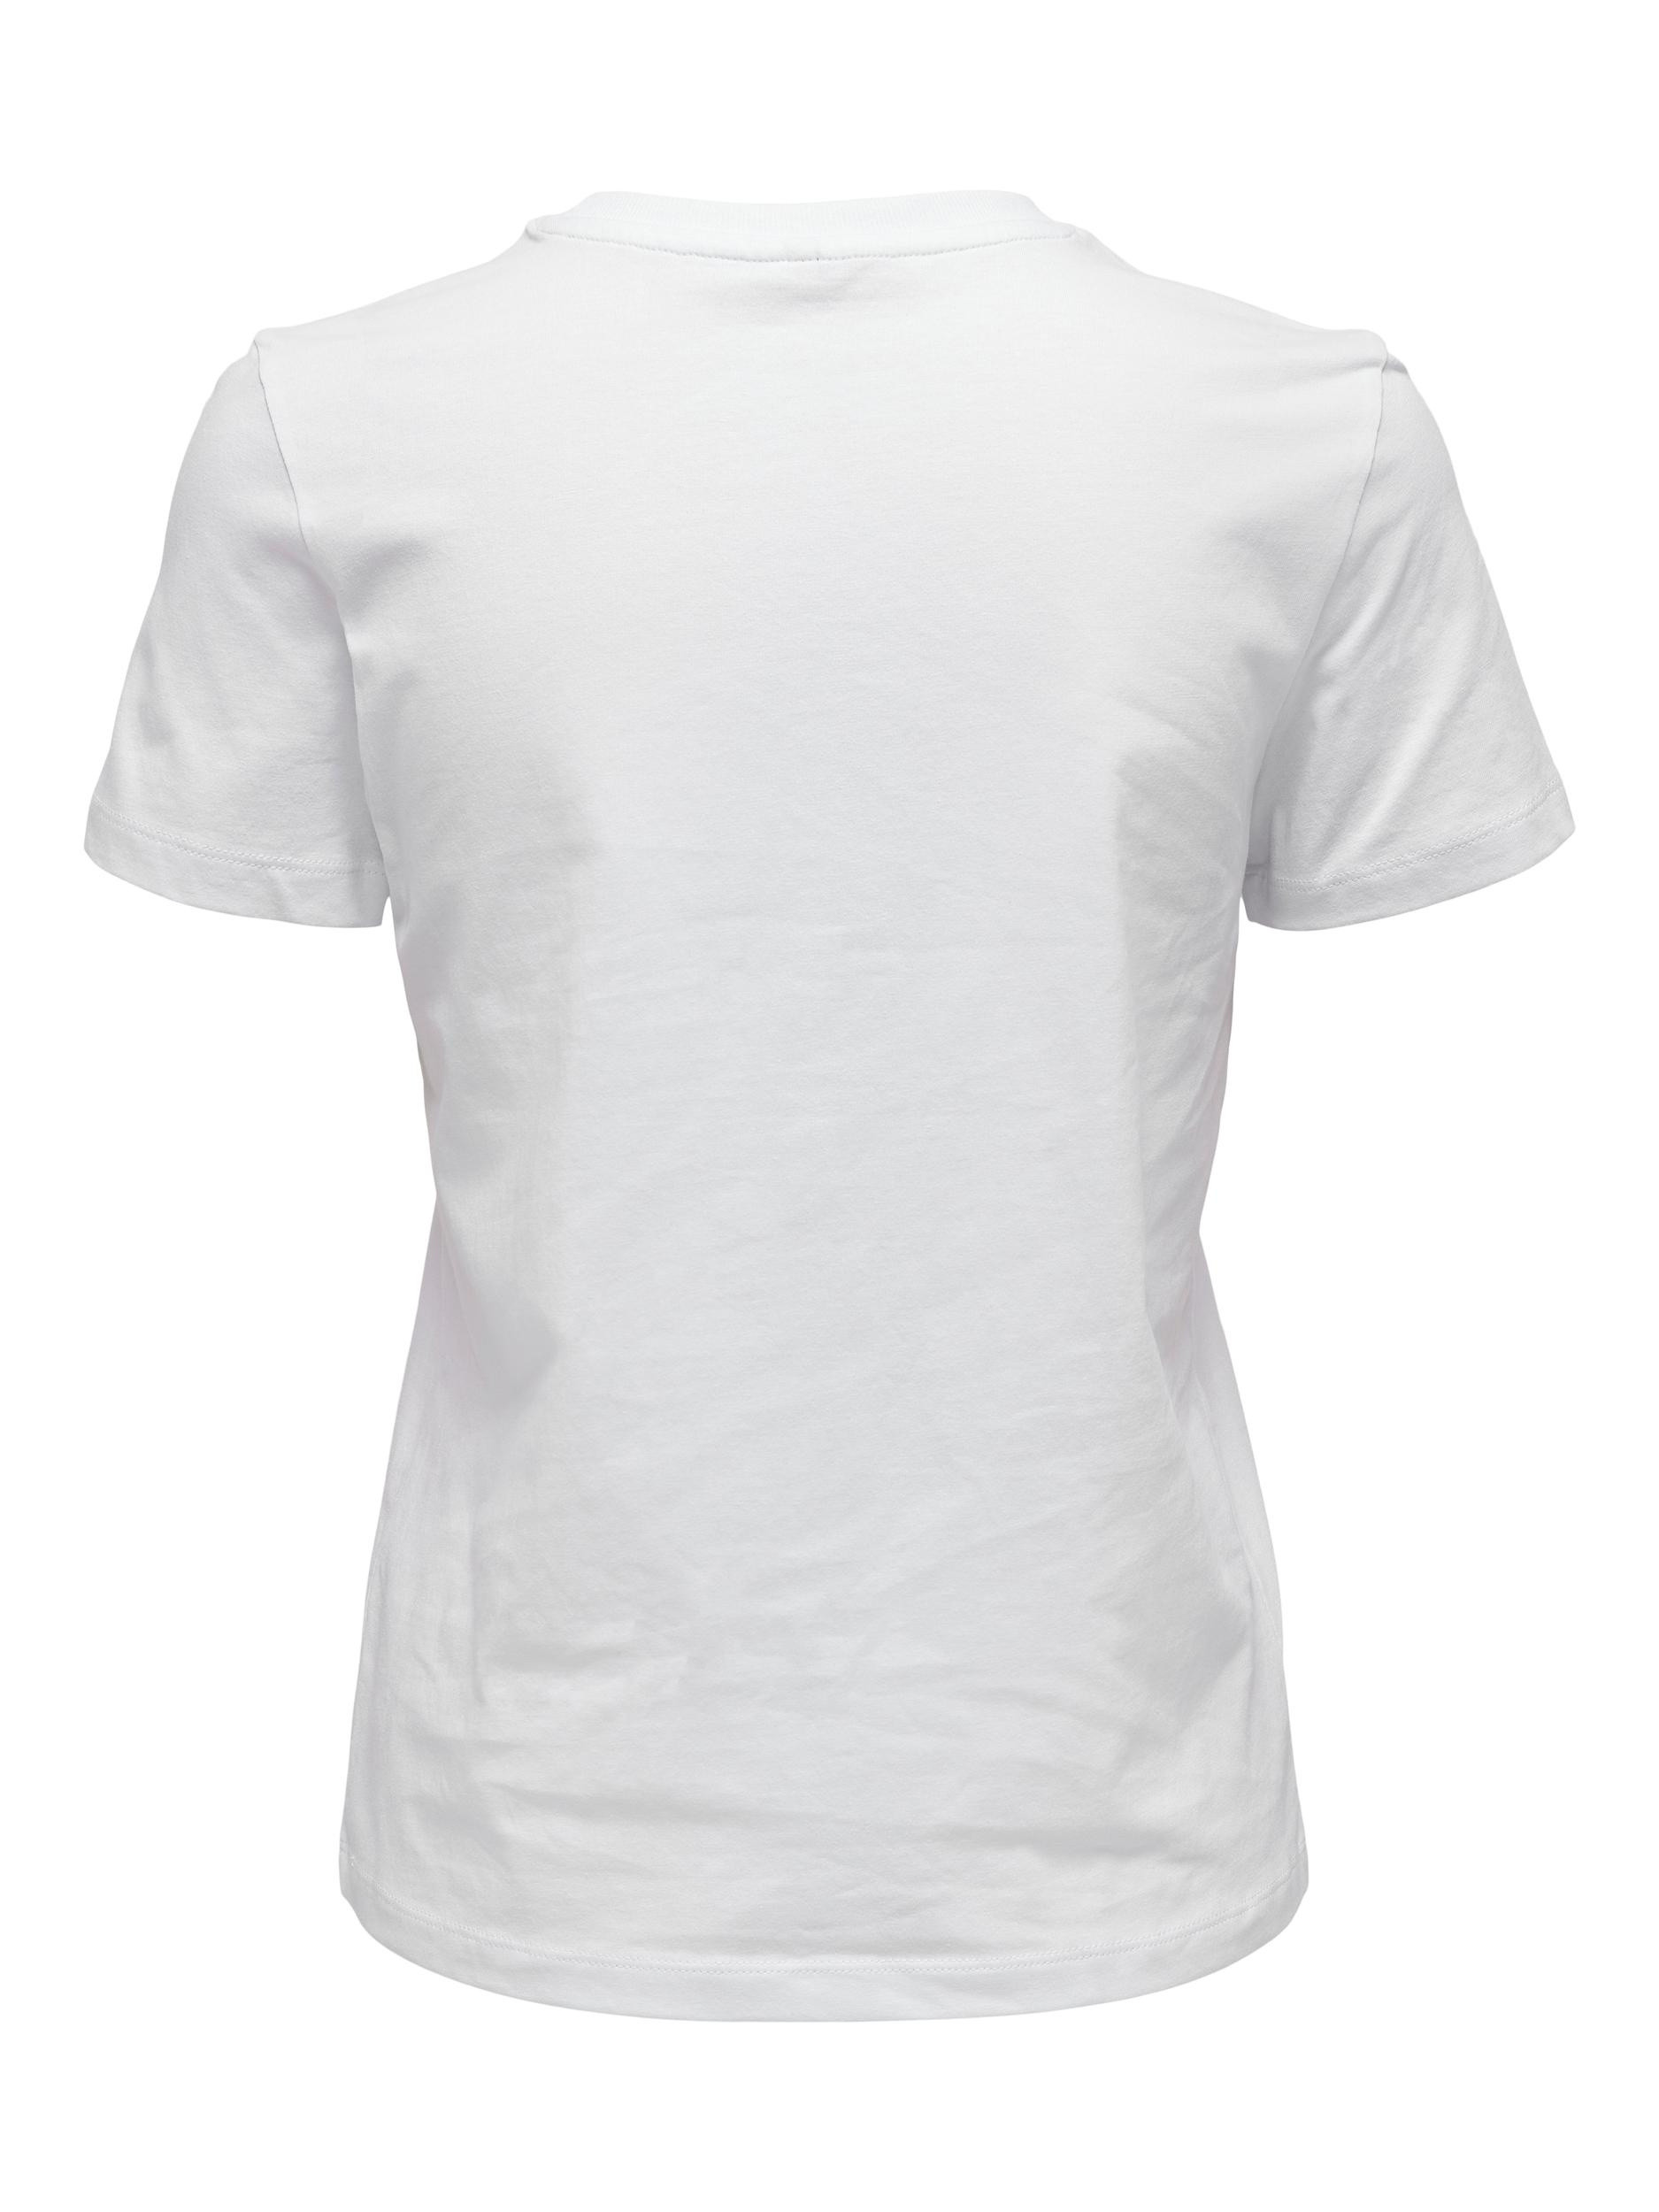 Only - Regular fit T-shirt with print, White, large image number 1